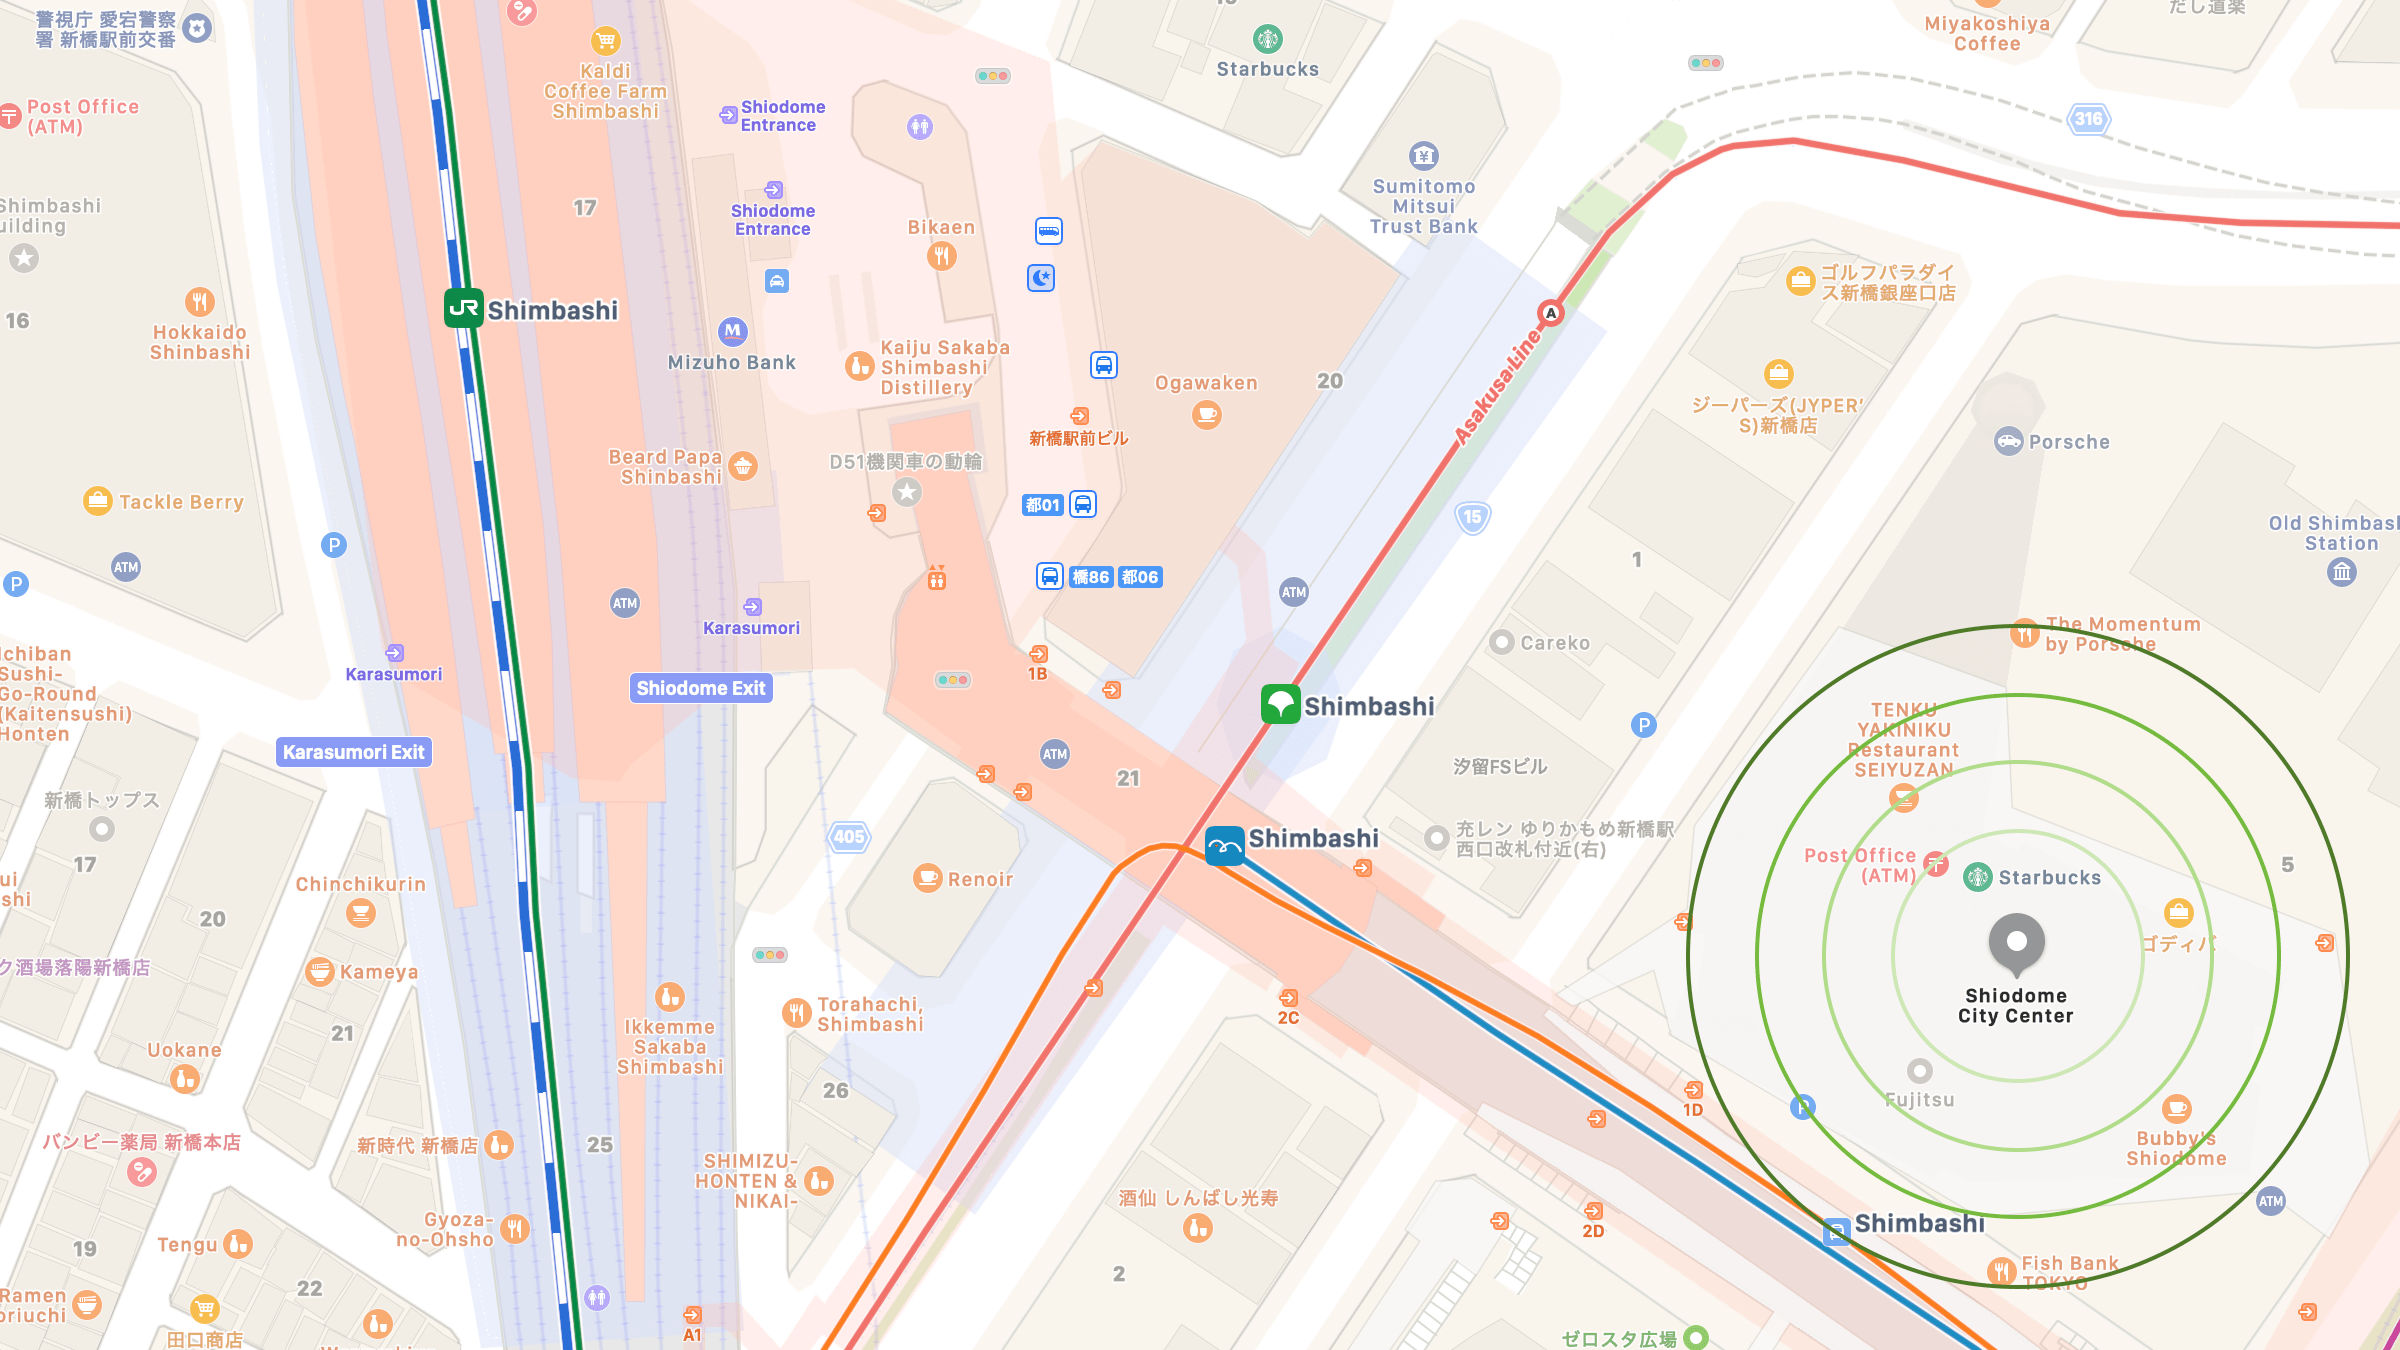 Screenshot of map of area around eSolia office in the Shiodome City Center, including JR Shimbashi Rail station.